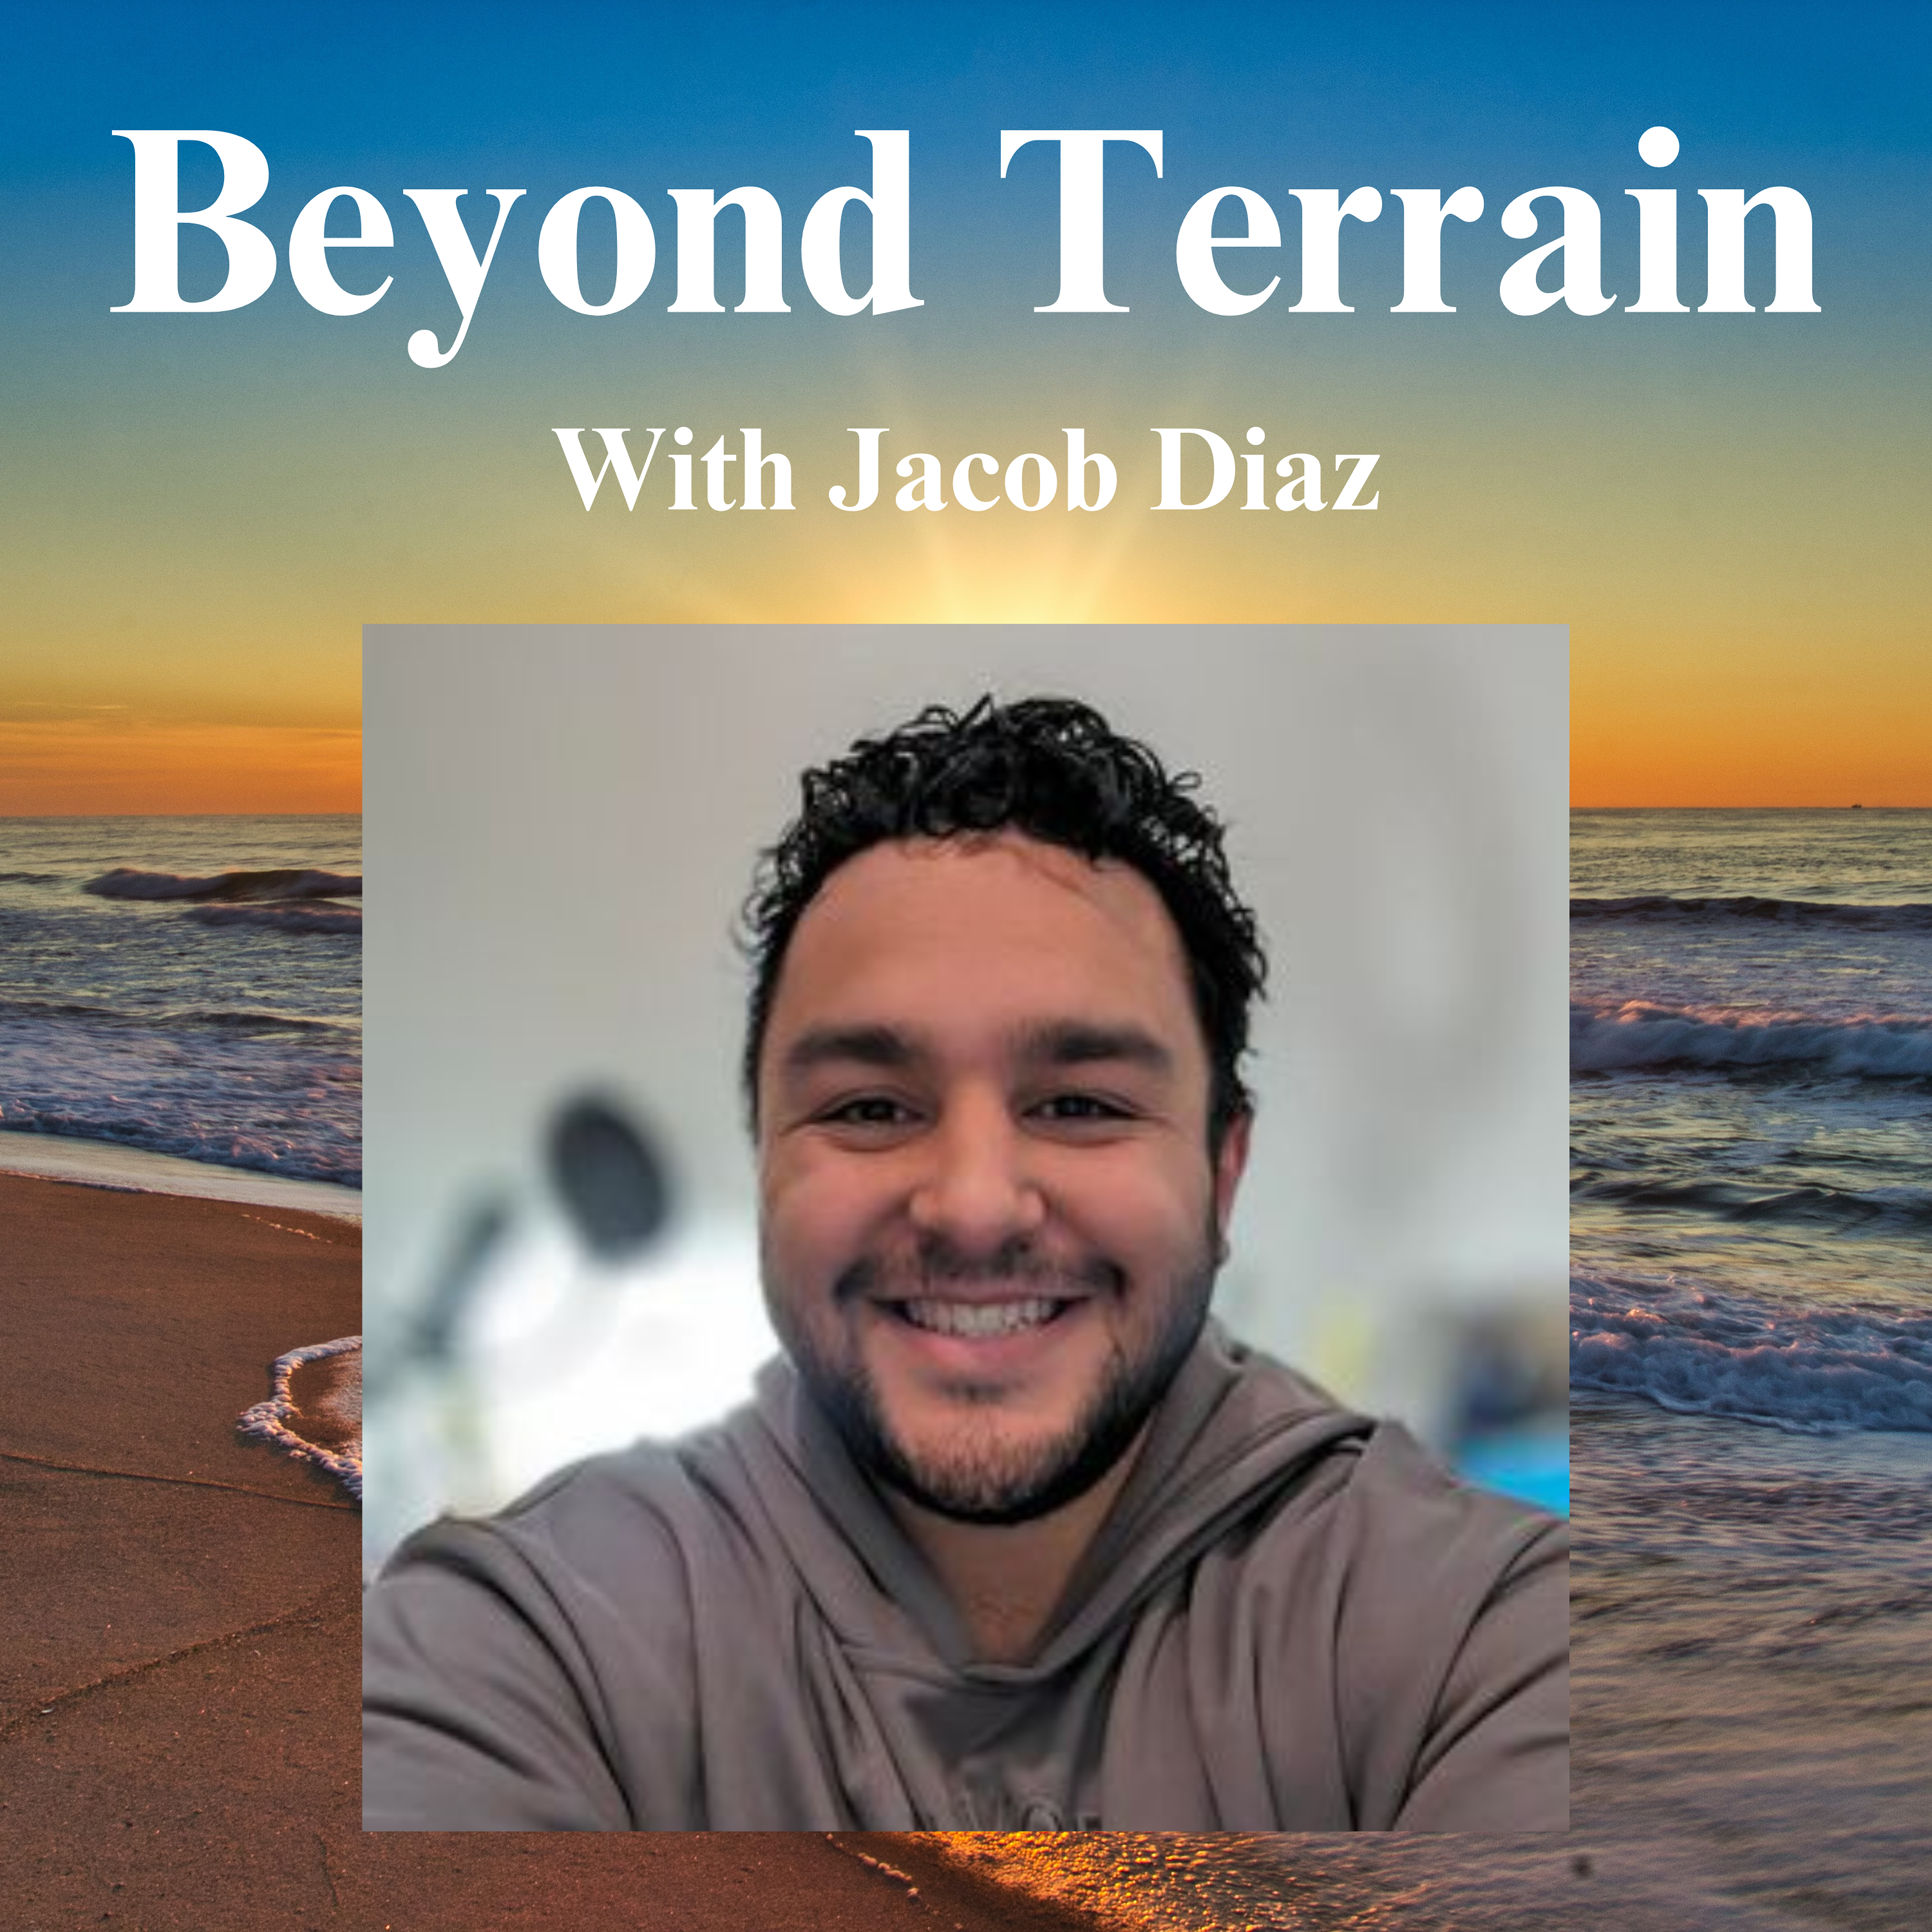 Jacob Diaz (Undercover Virologist) on Pleiomorphism, 'Immune System' Fallacies, Lymphatic System, and so much more!